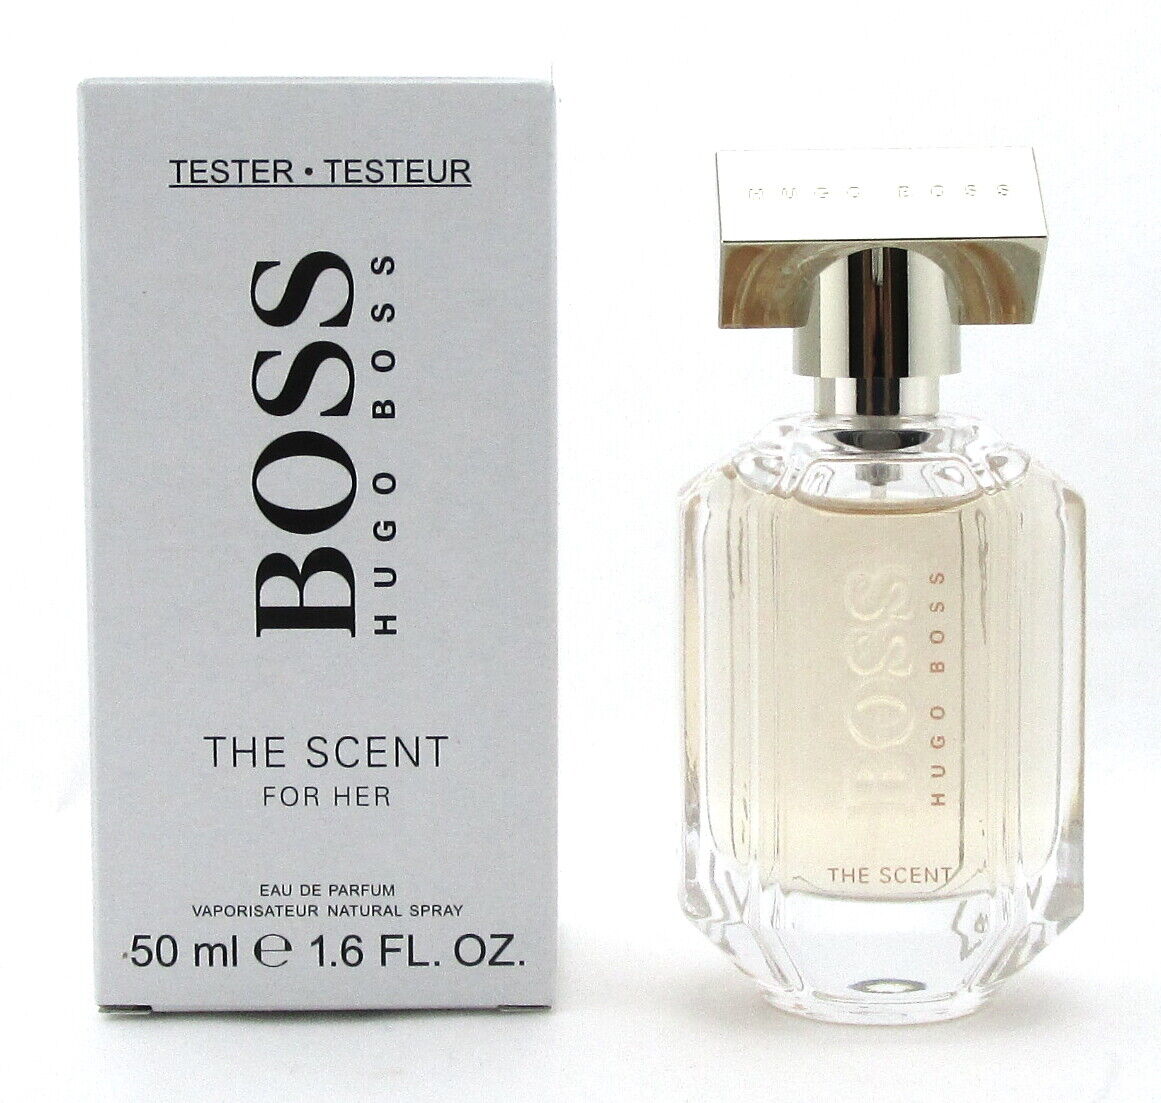 Hugo Boss The Scent for Her 1.6 oz. EDP Spray for Women. New Tester with Top